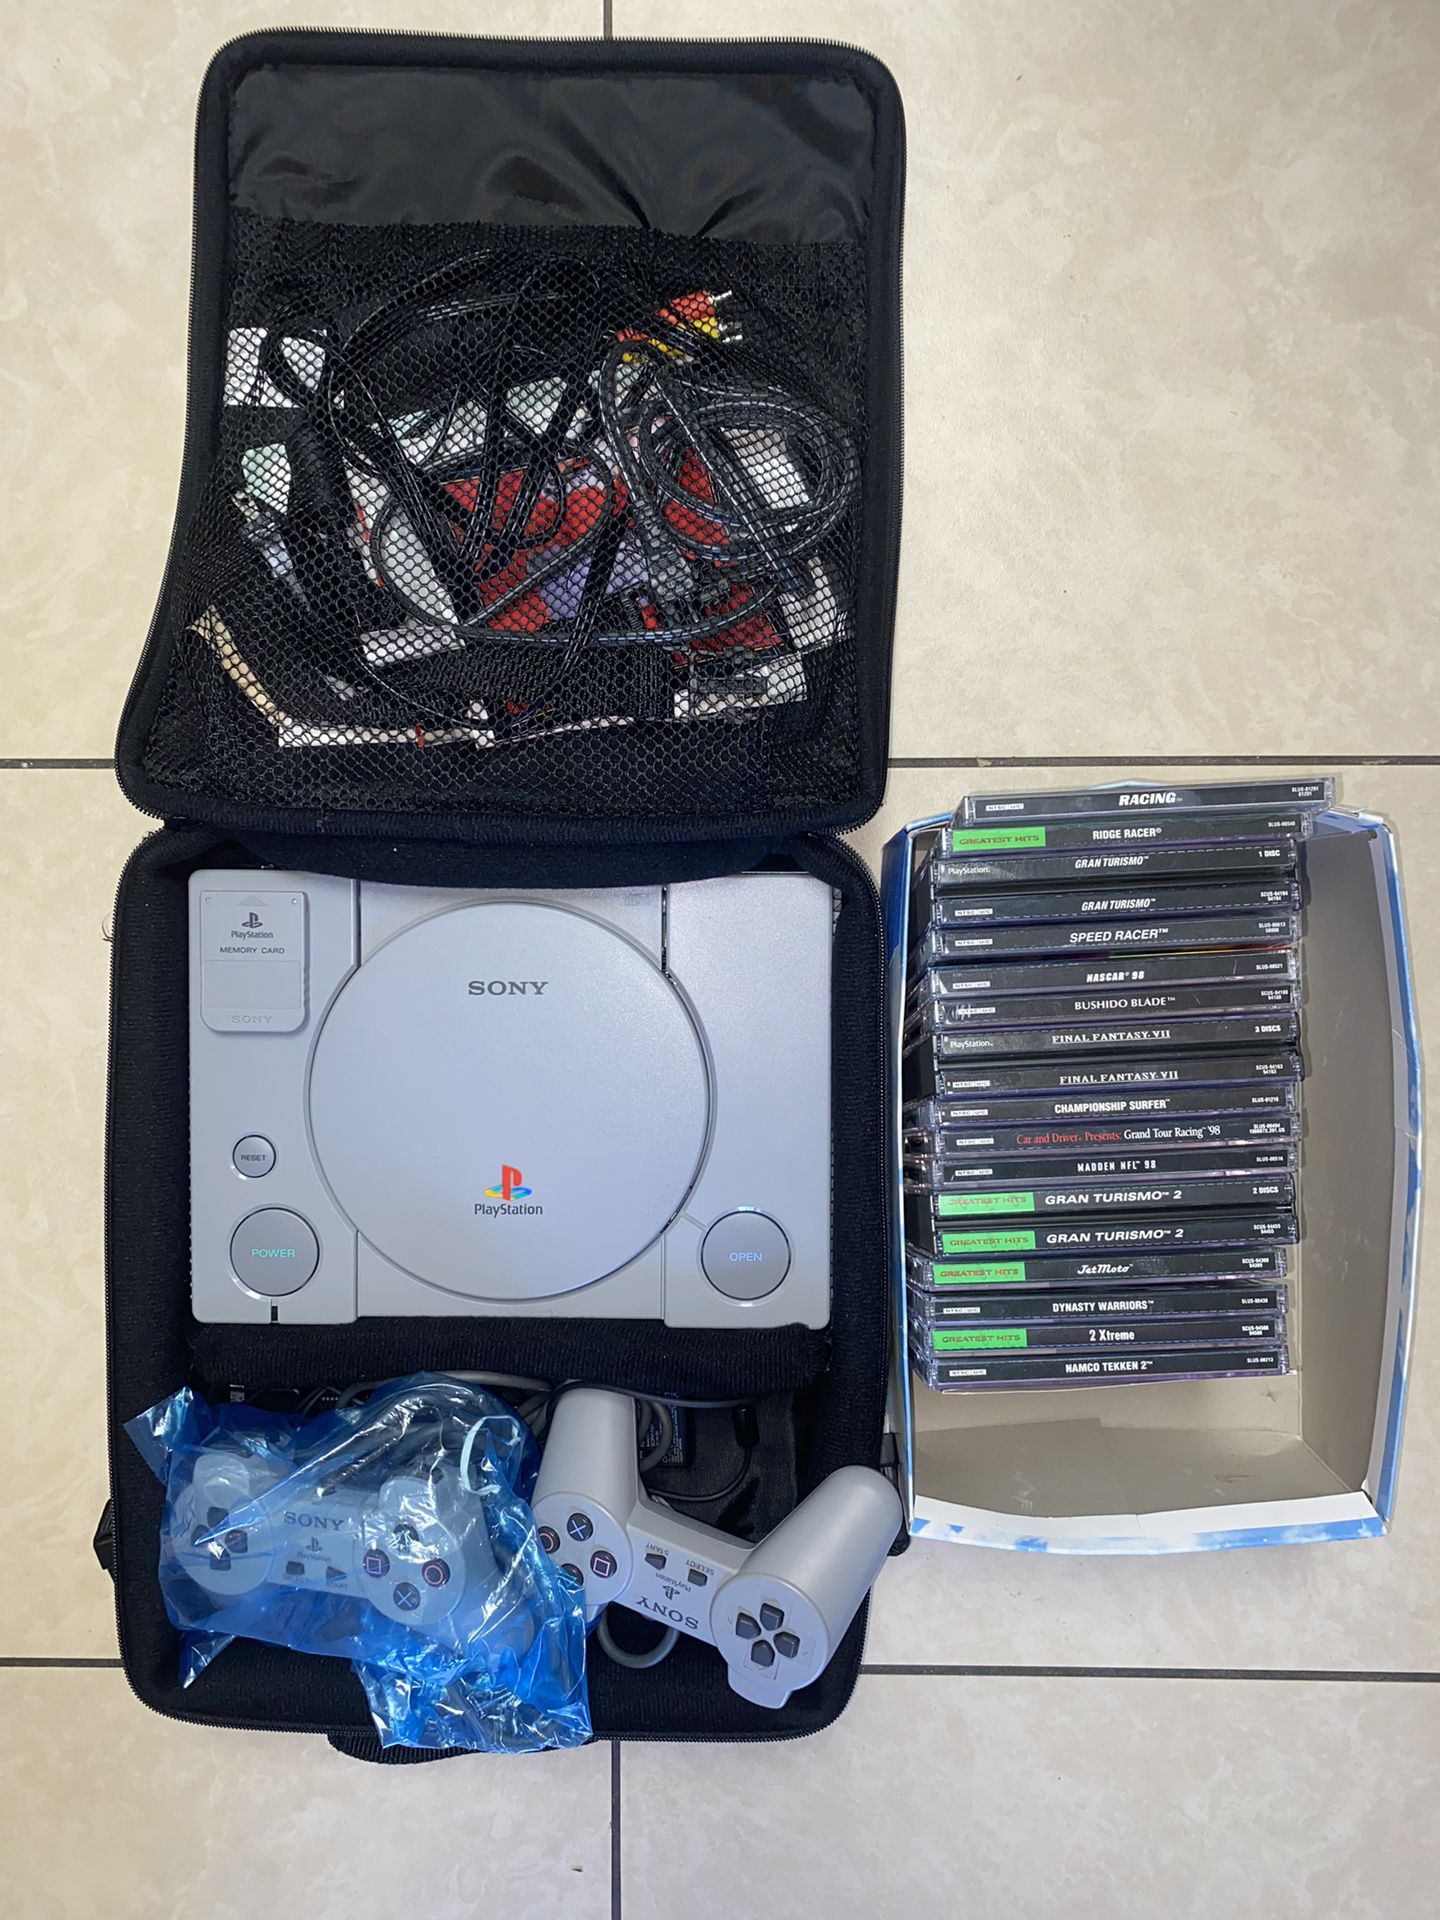 Ps1 Console W/ Games And Controllers